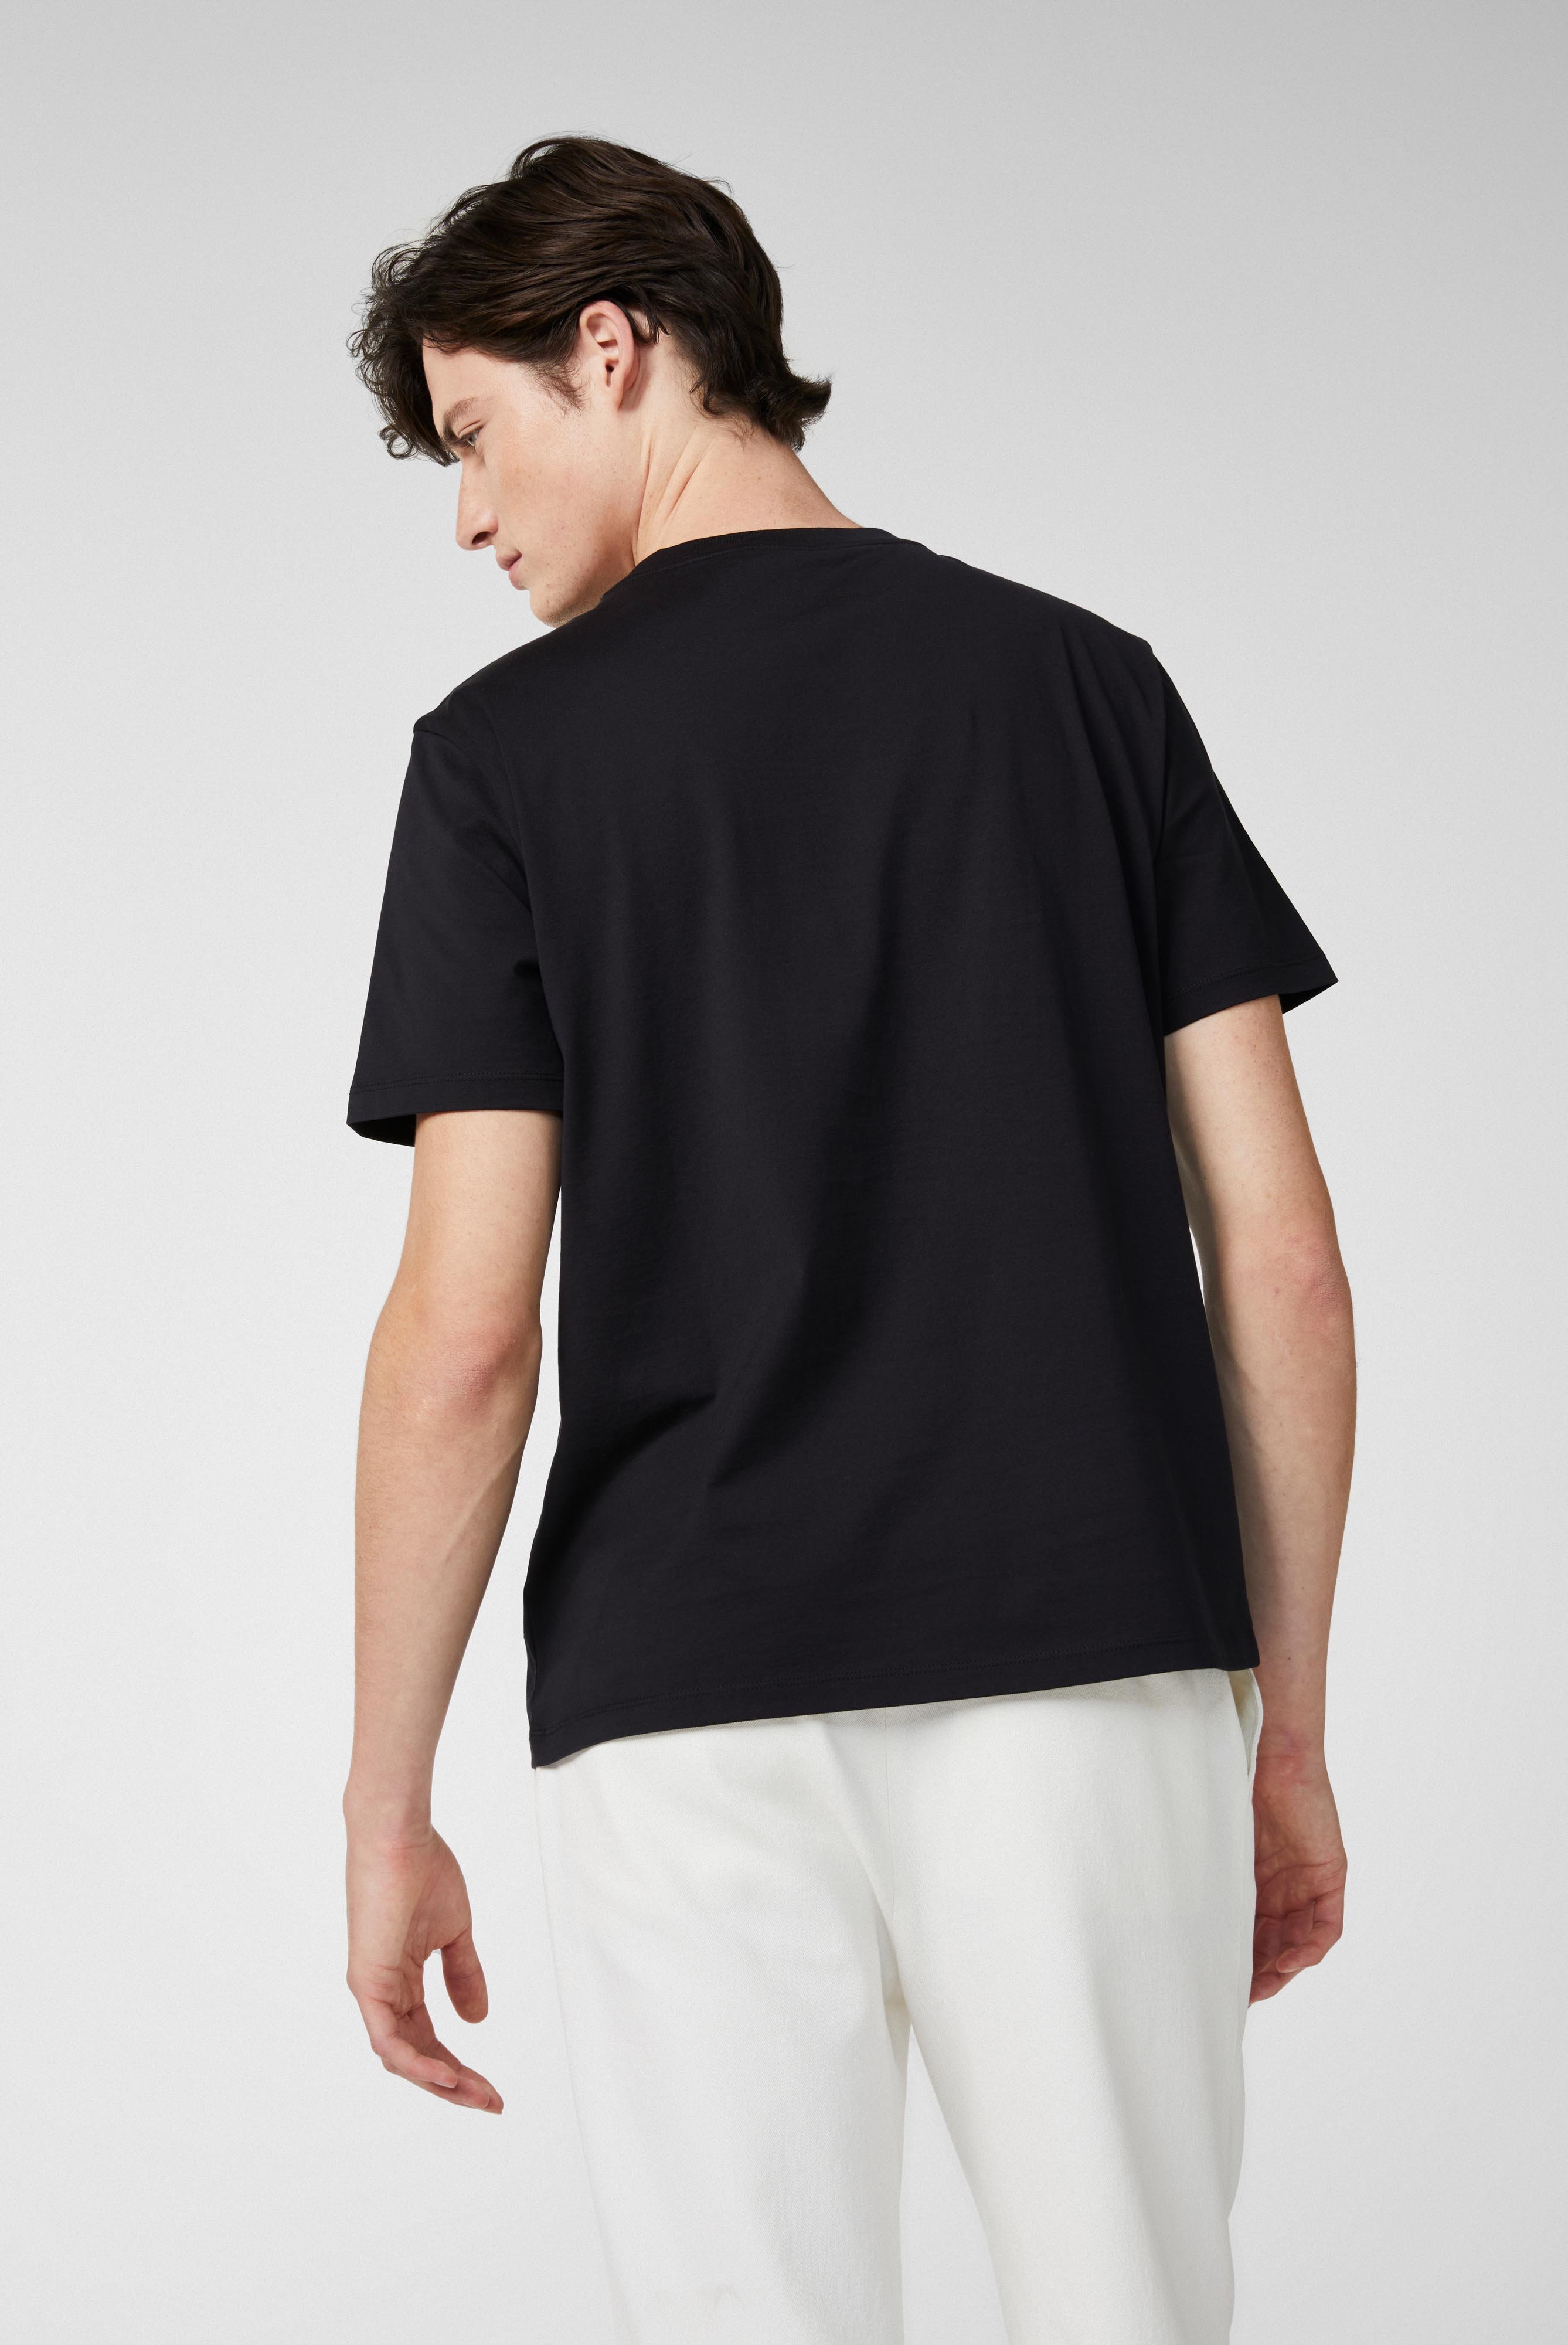 T-Shirts+Relaxed Fit Crew Neck Jersey T-Shirt+20.1660..Z20044.099.M